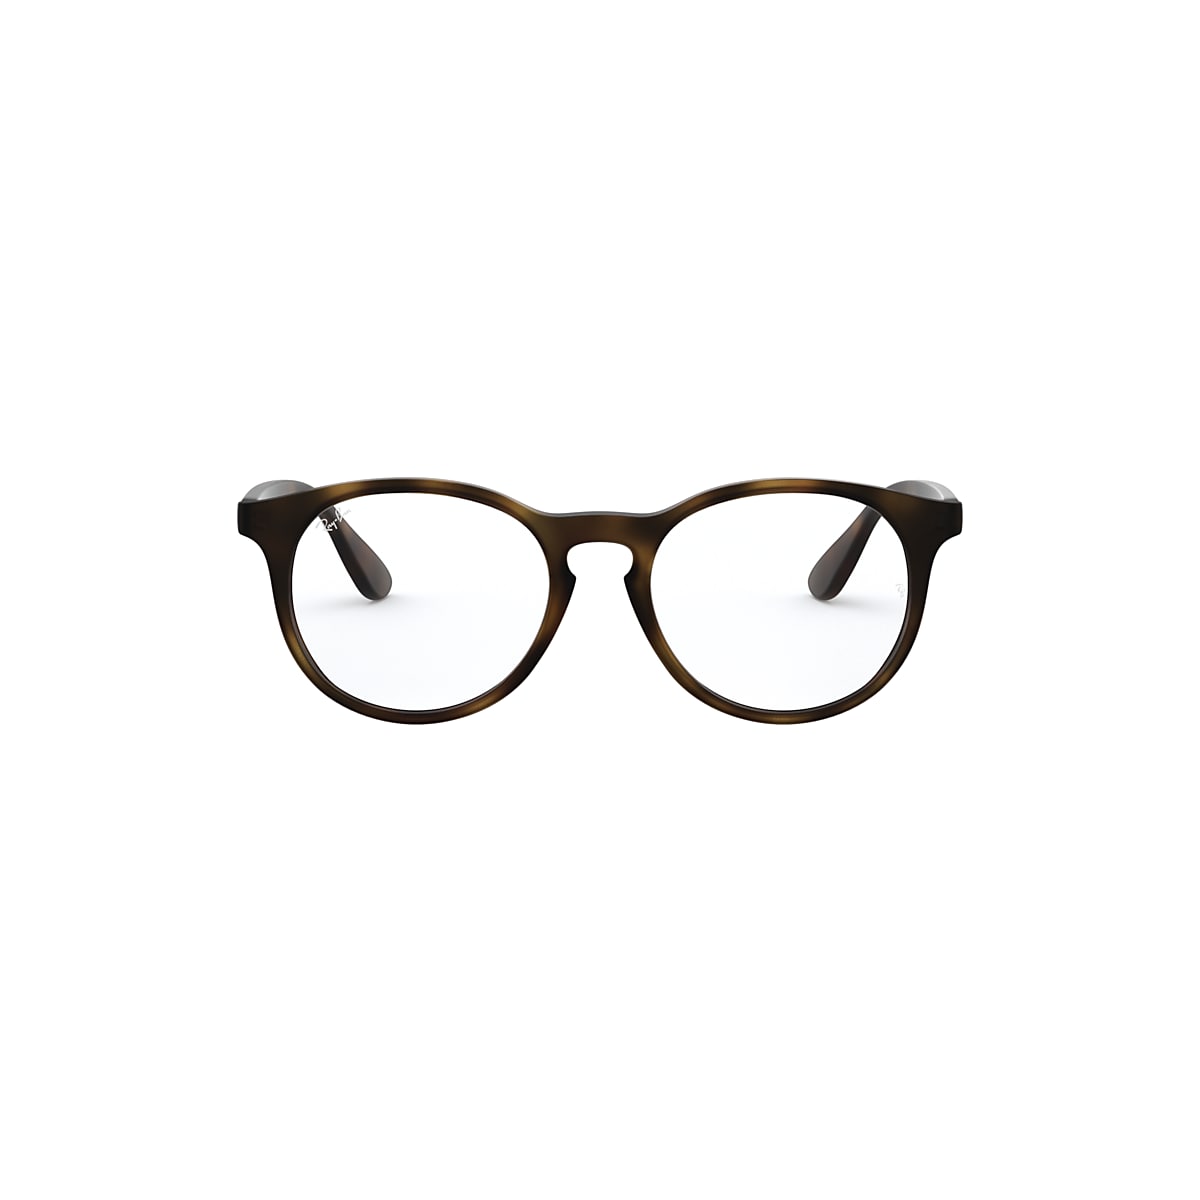 Ray-Ban 0RY1554 Glasses in Tortoise | Target